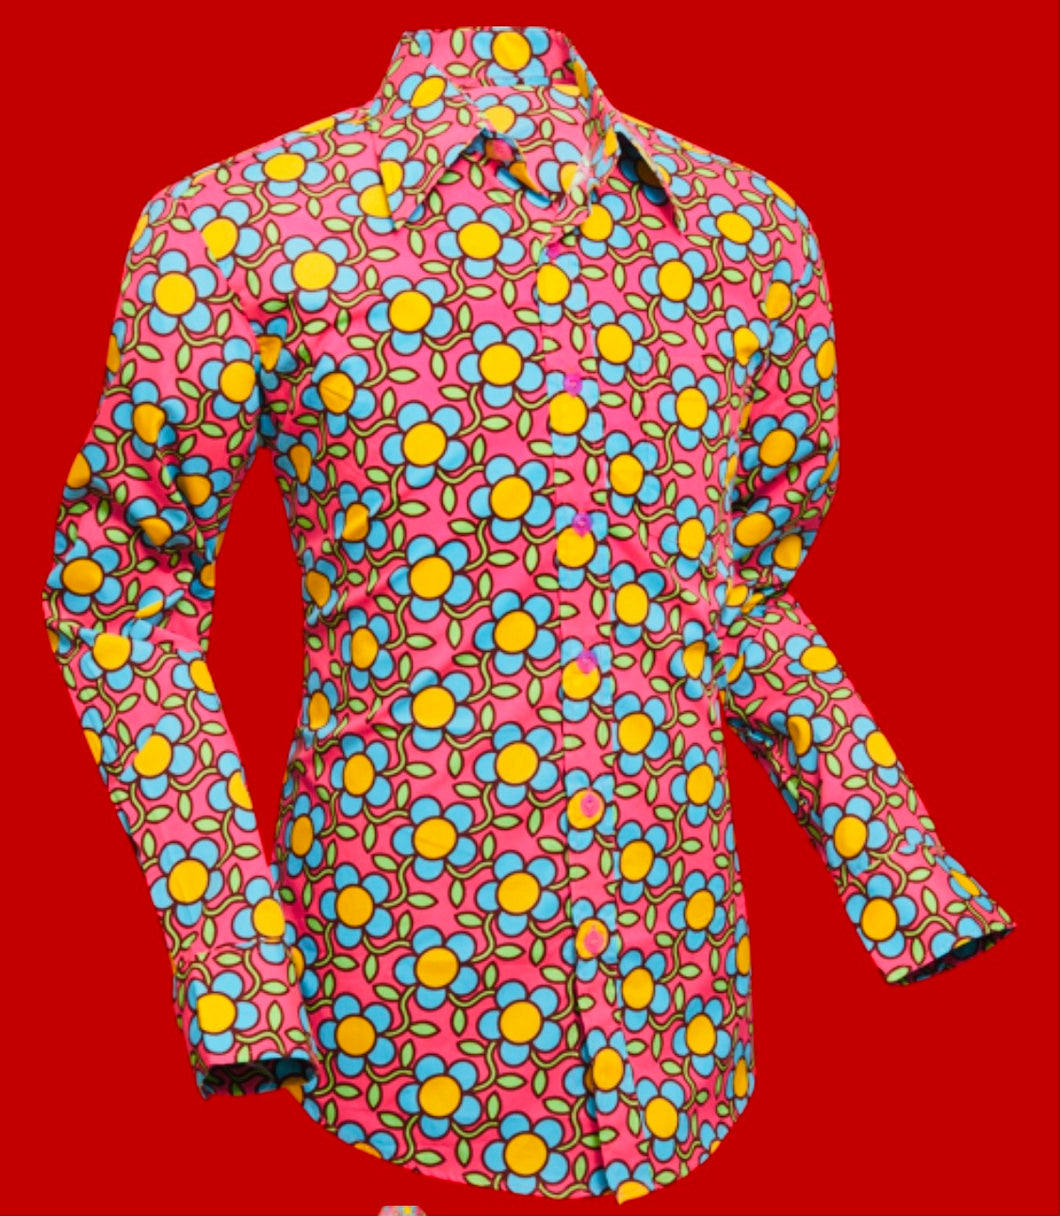 Flowergrid design long sleeved Retro 70s style shirt in Pink